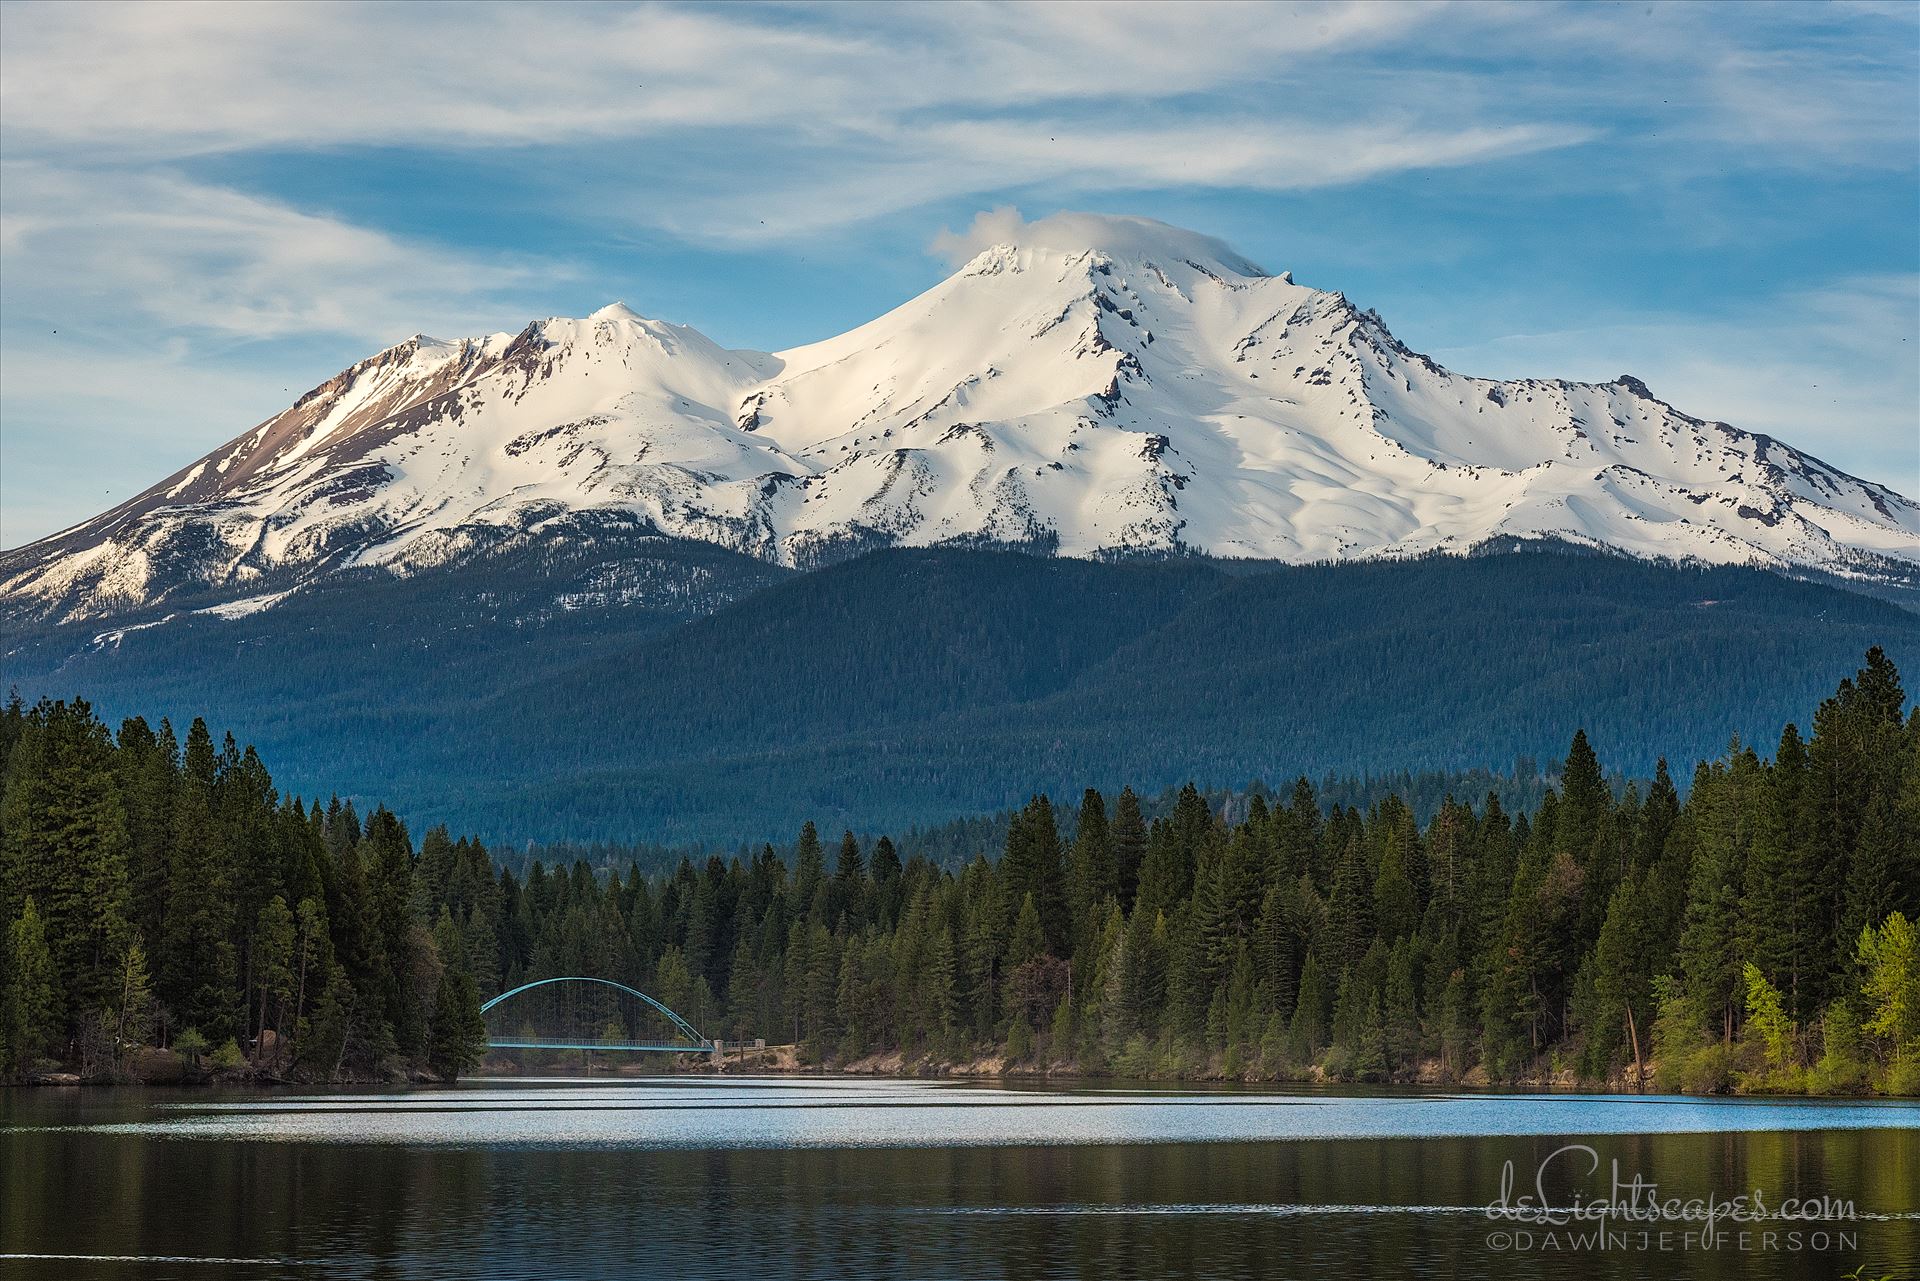 Mt Shasta from the Lake. Mt Shasta view and pedestrian footbridge from the lake by Dawn Jefferson